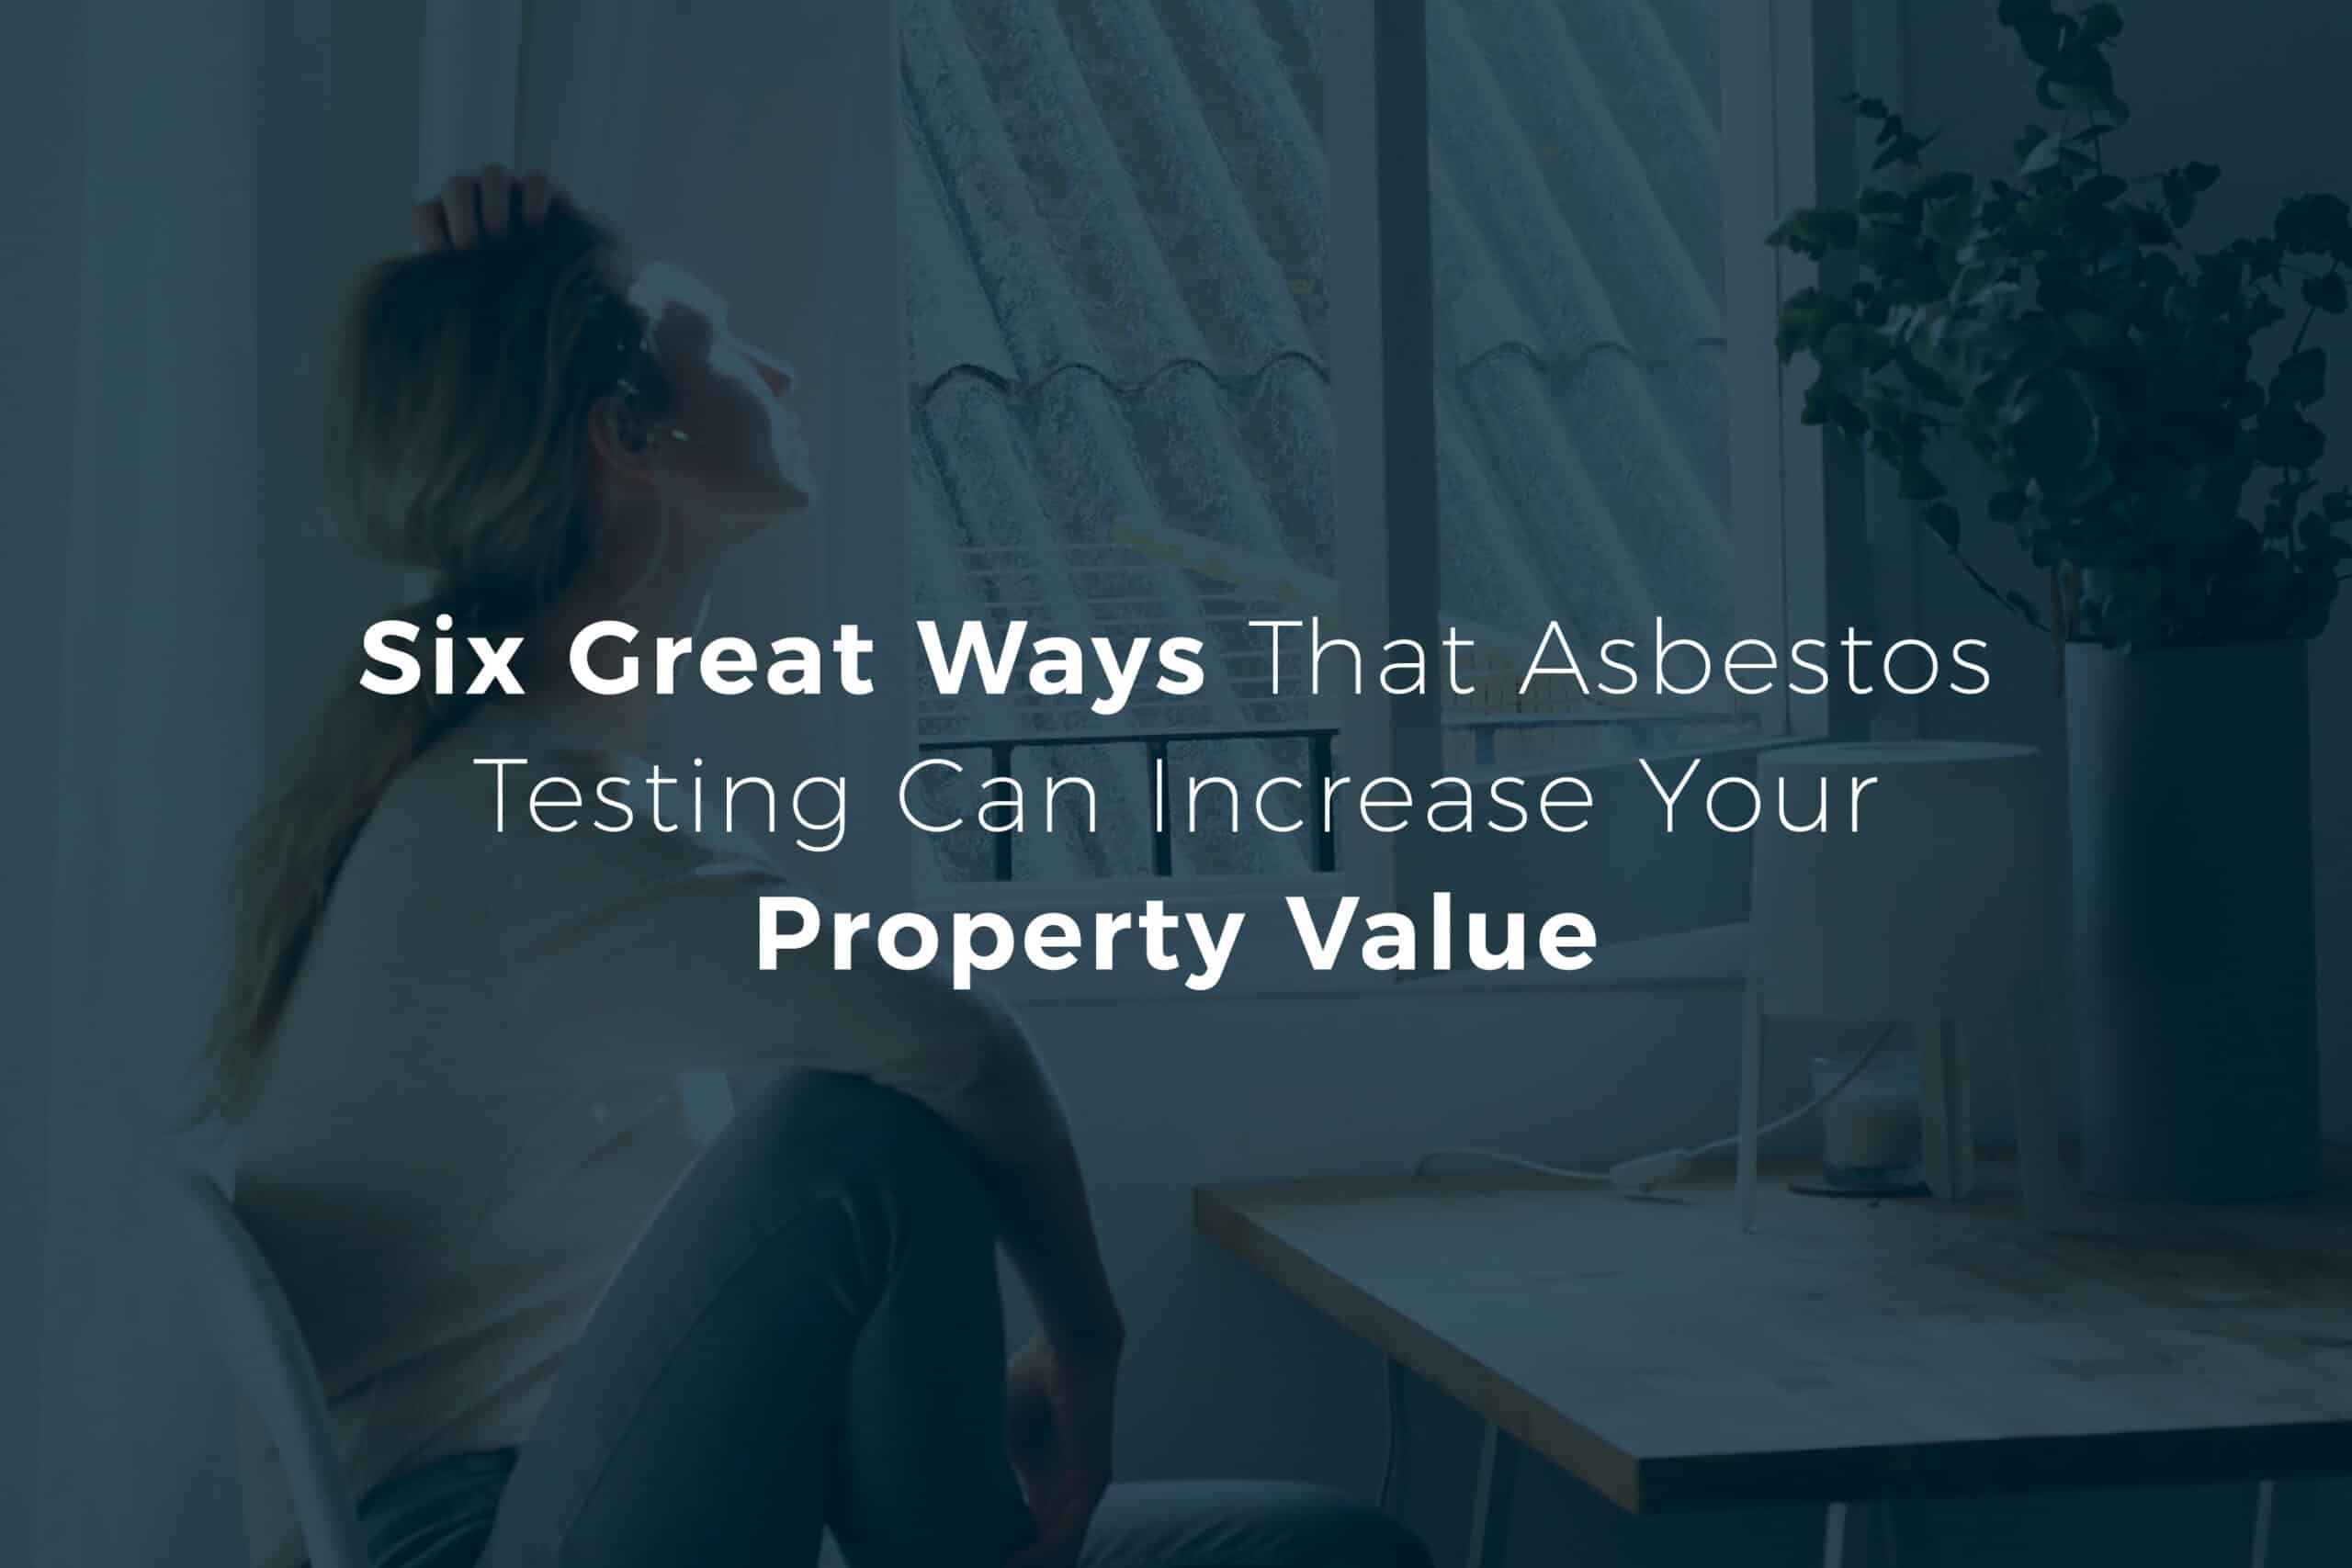 Headline that says "6 great ways asbestos testing can increase your property value, with a women looking out her home window.